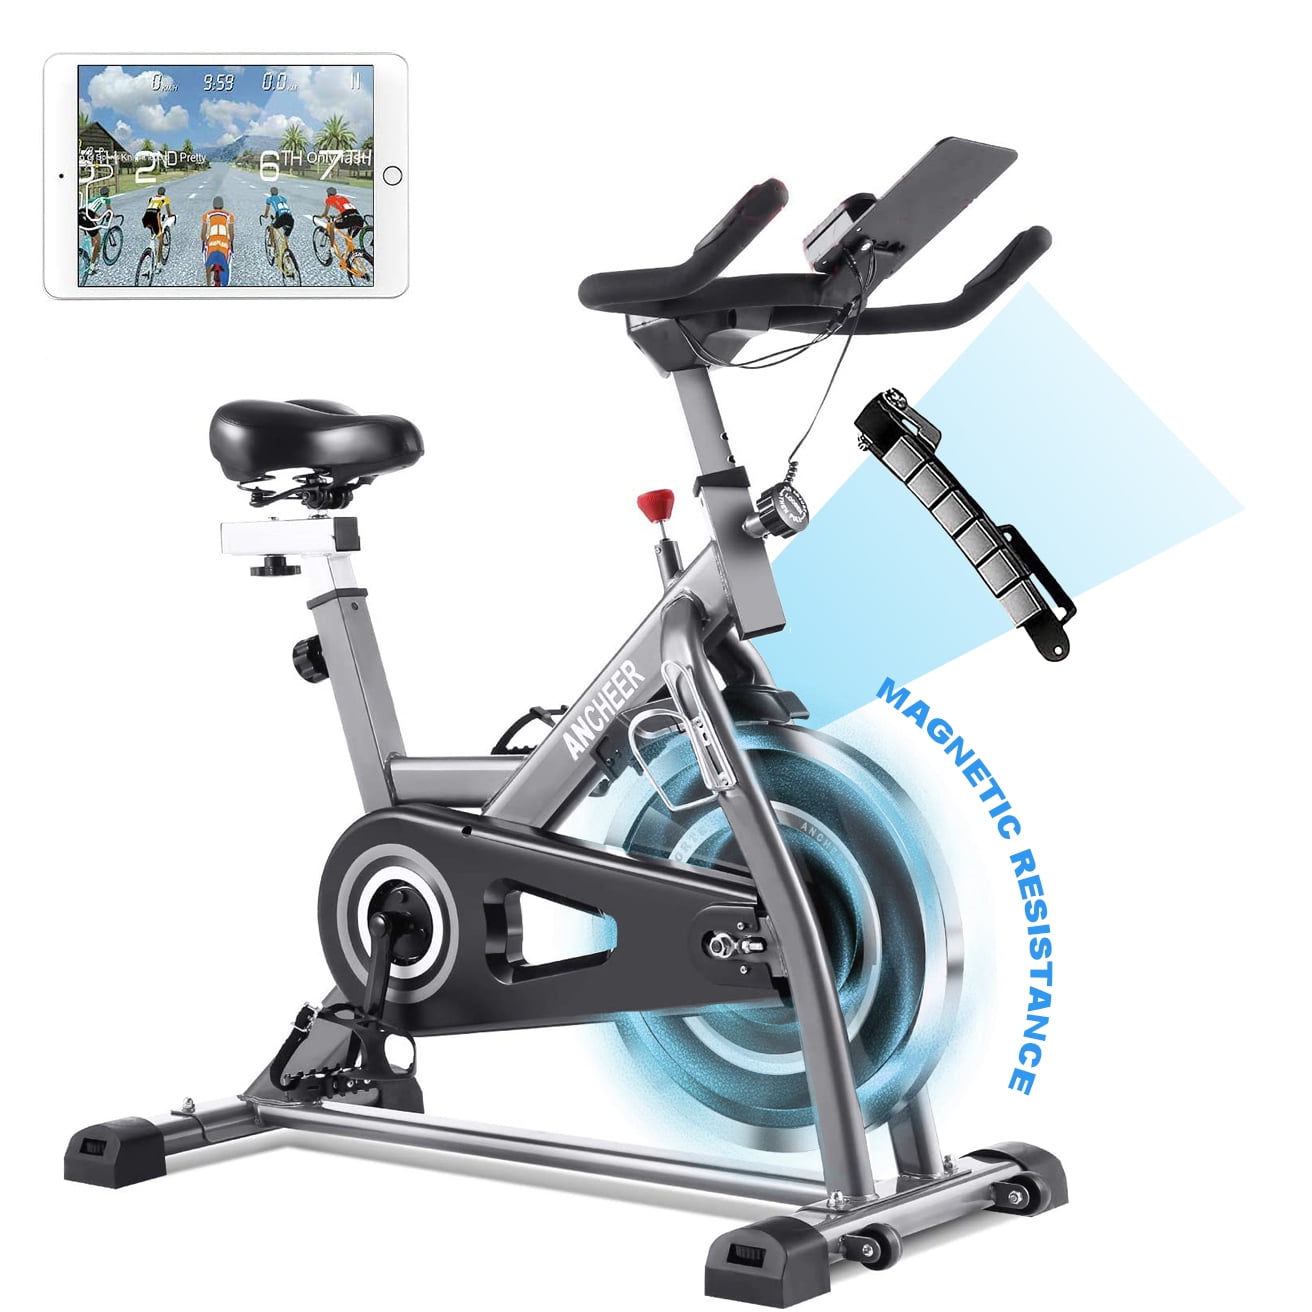 Details about   Indoor Exercise Bike Stationary Bicycle Cycling Home Cardio Workout Gym Training 